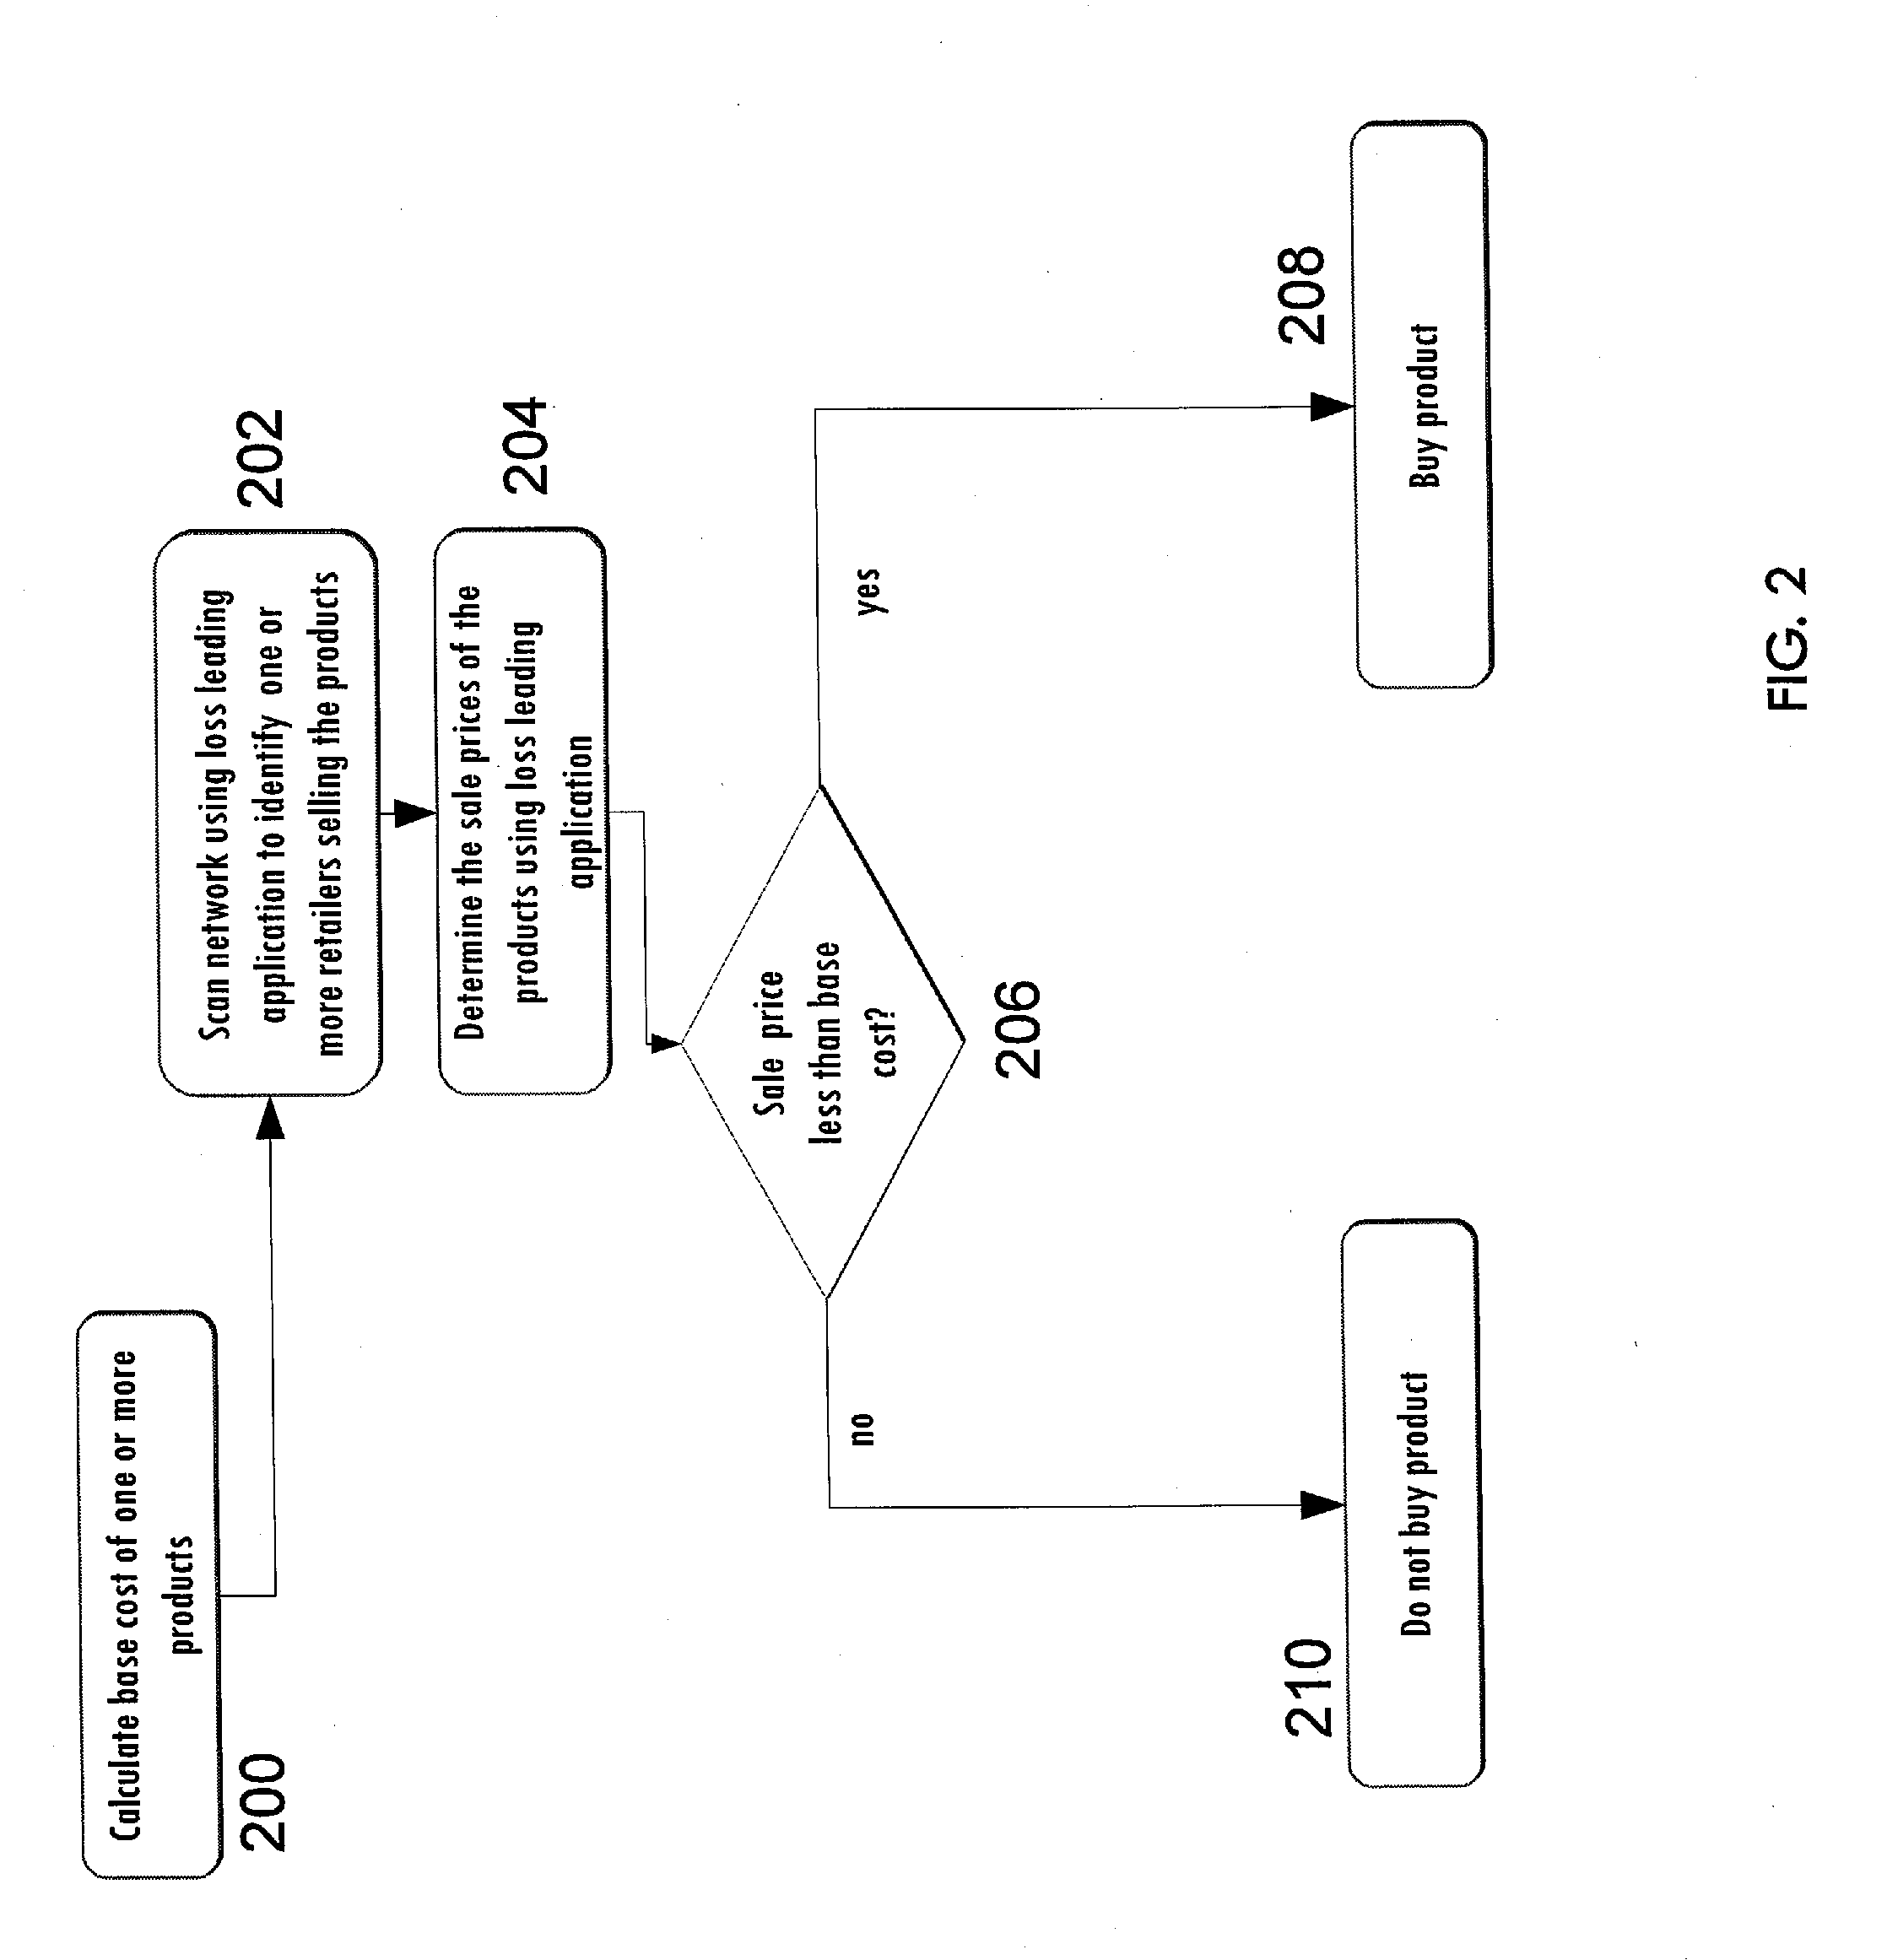 System and Method for Preventing, Responding to, or Discouraging Predatory and Uncompetitive Sales Practices